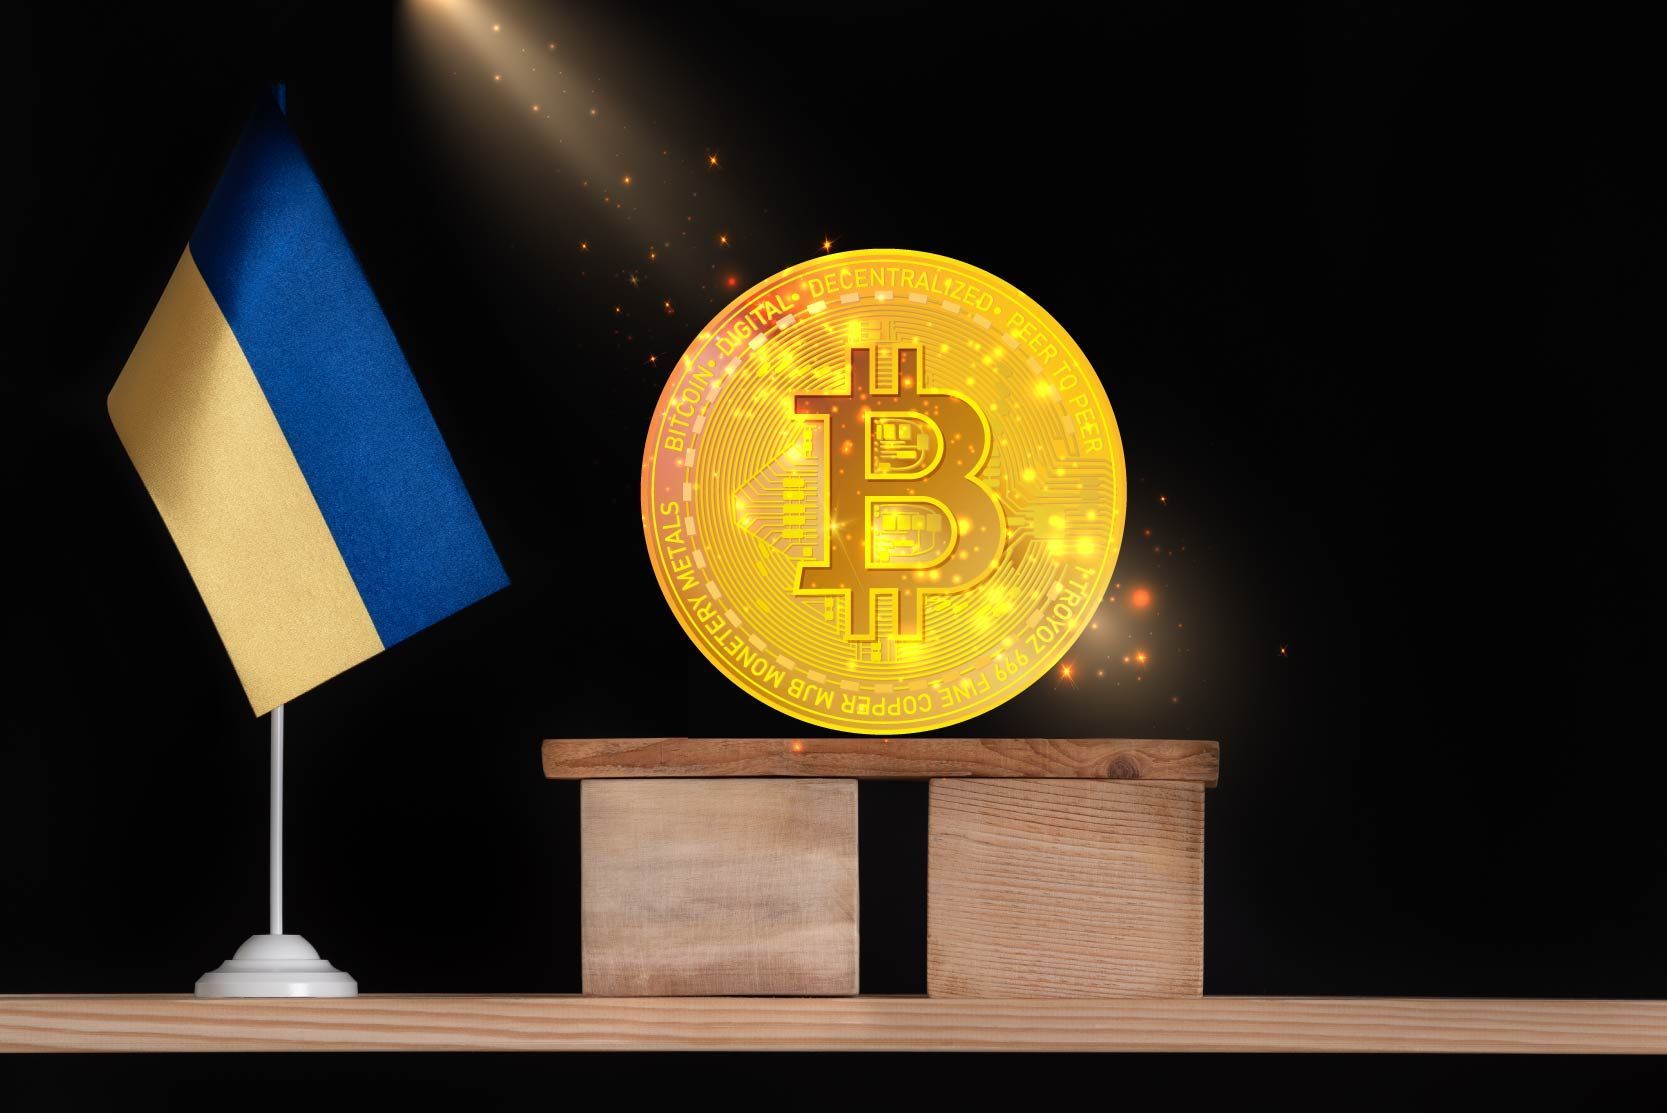 In Ukraine, up to 276 lawmakers voted in favor of legalizing cryptocurrencies